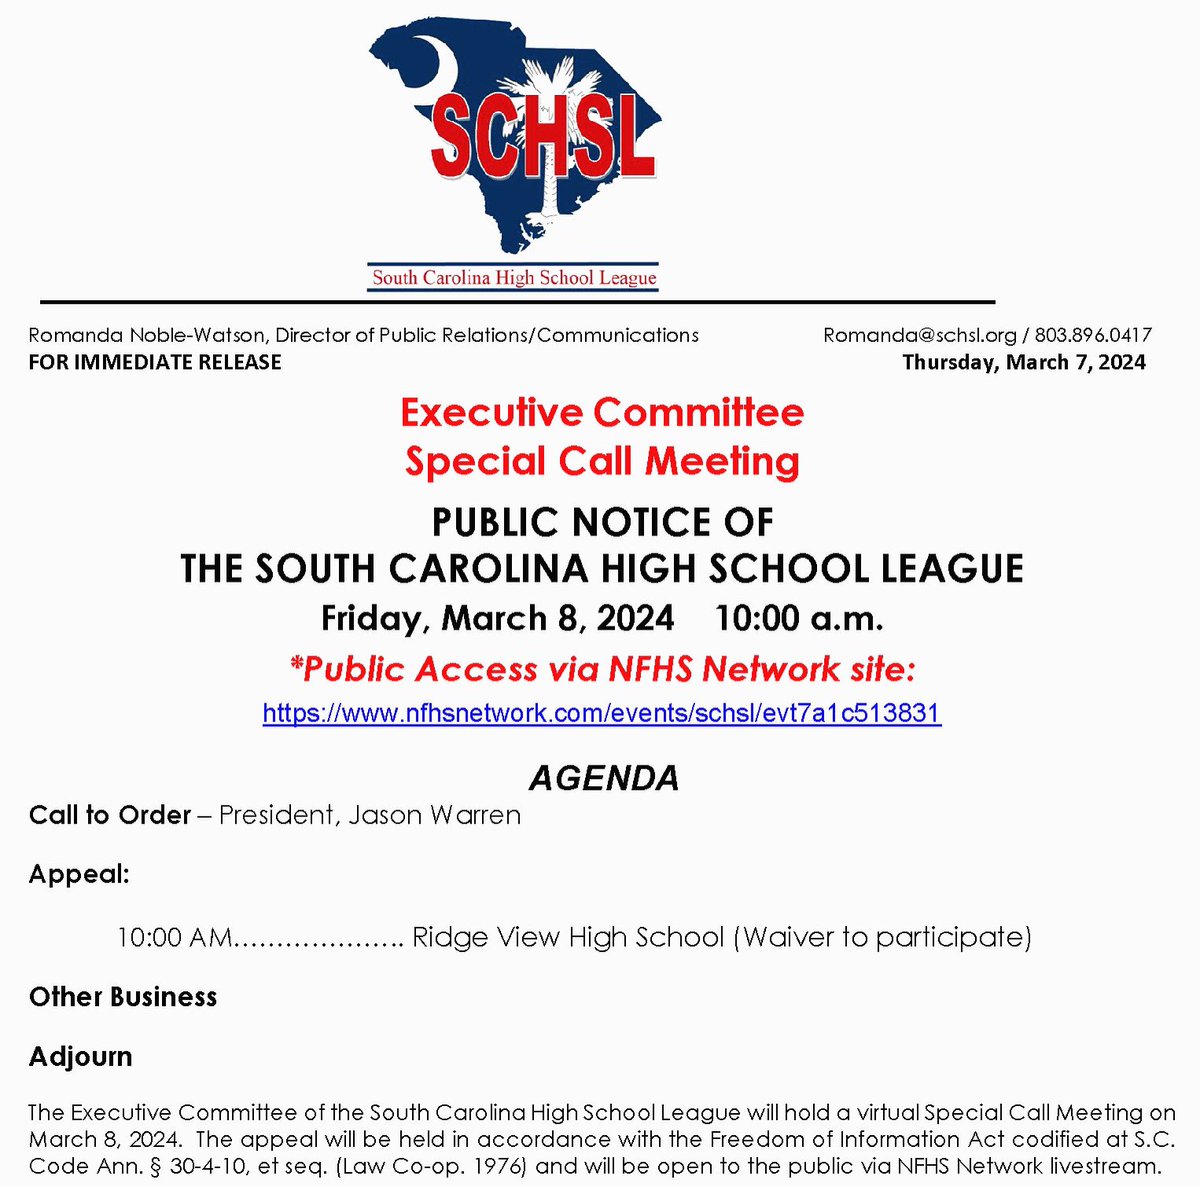 The @SCHSL Executive Committee will hold a virtual Special Call Meeting, Friday, March 8, 2024 at 10:00 am Viewing available live at nfhsnetwork.com/events/schsl/e… #WeAreSCHSL